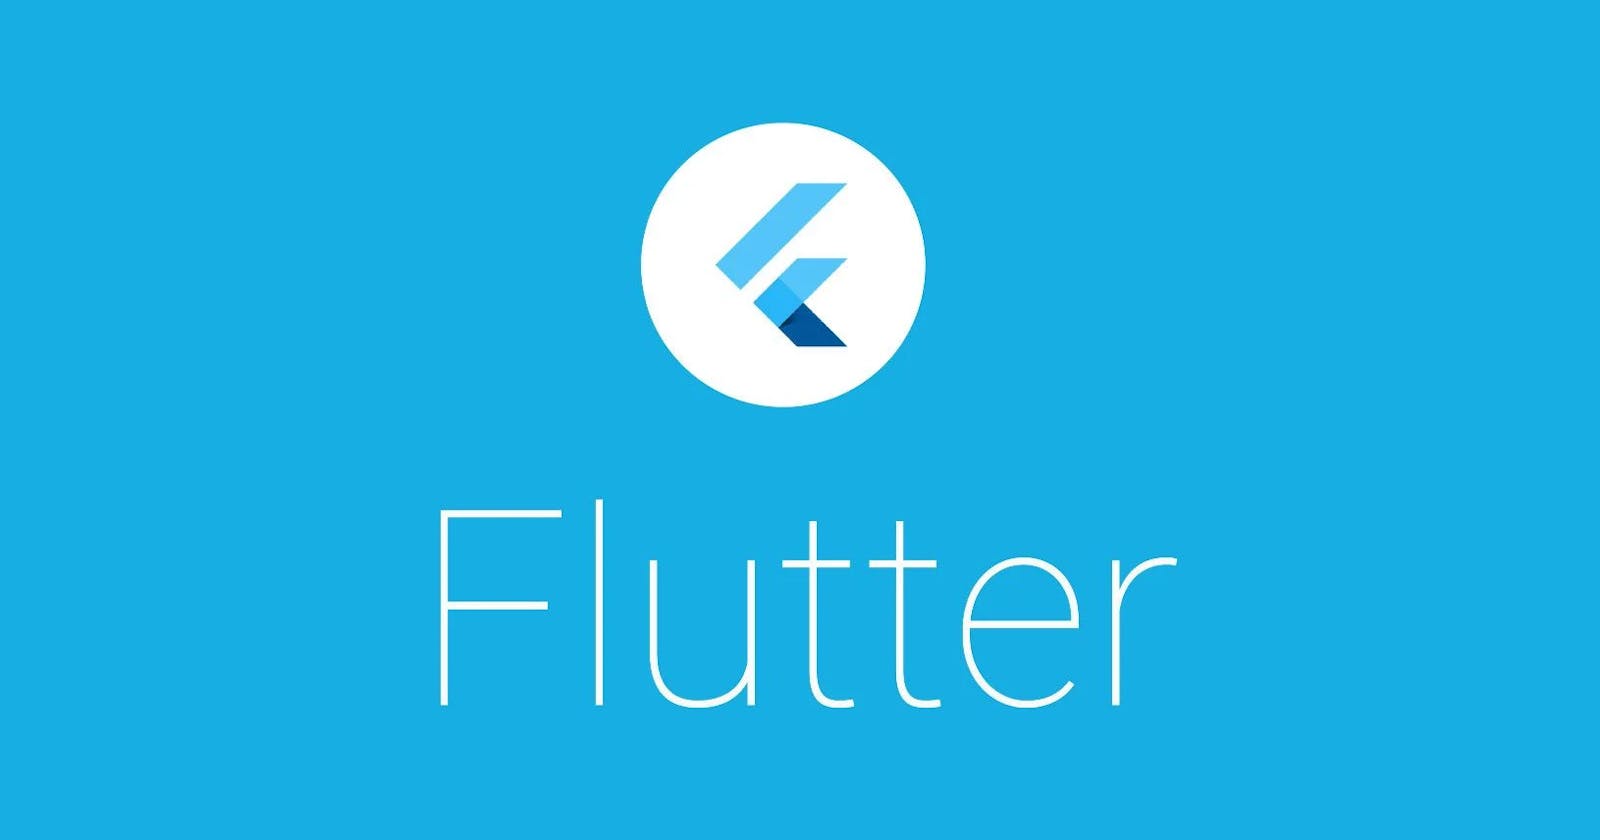 My experience with Flutter (as a beginner)